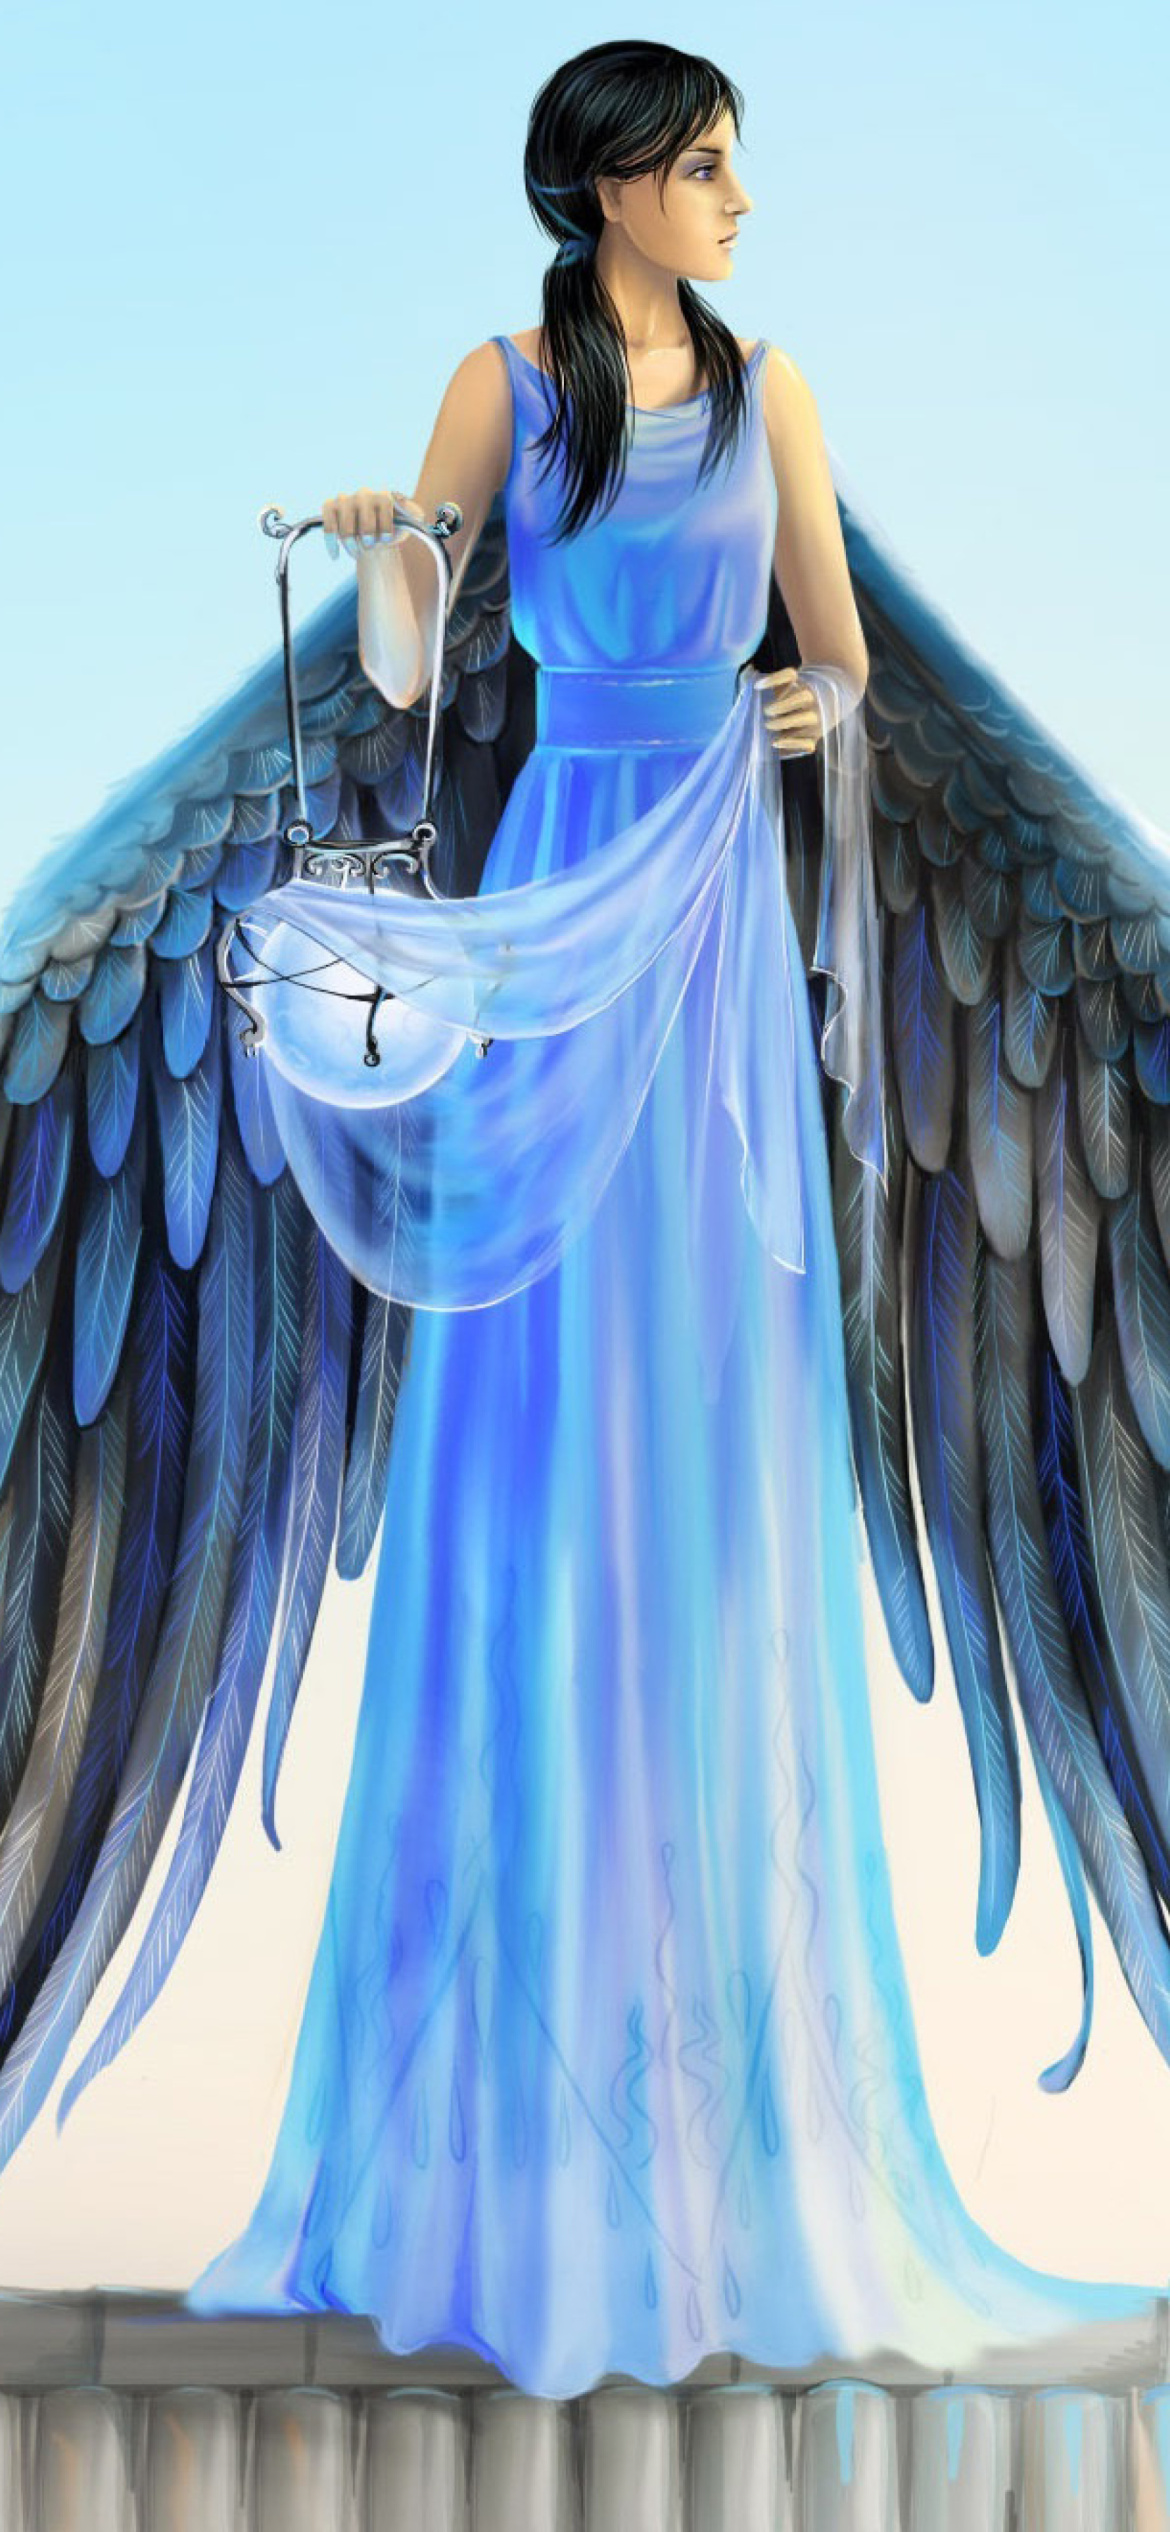 Das Angel with Wings Wallpaper 1170x2532